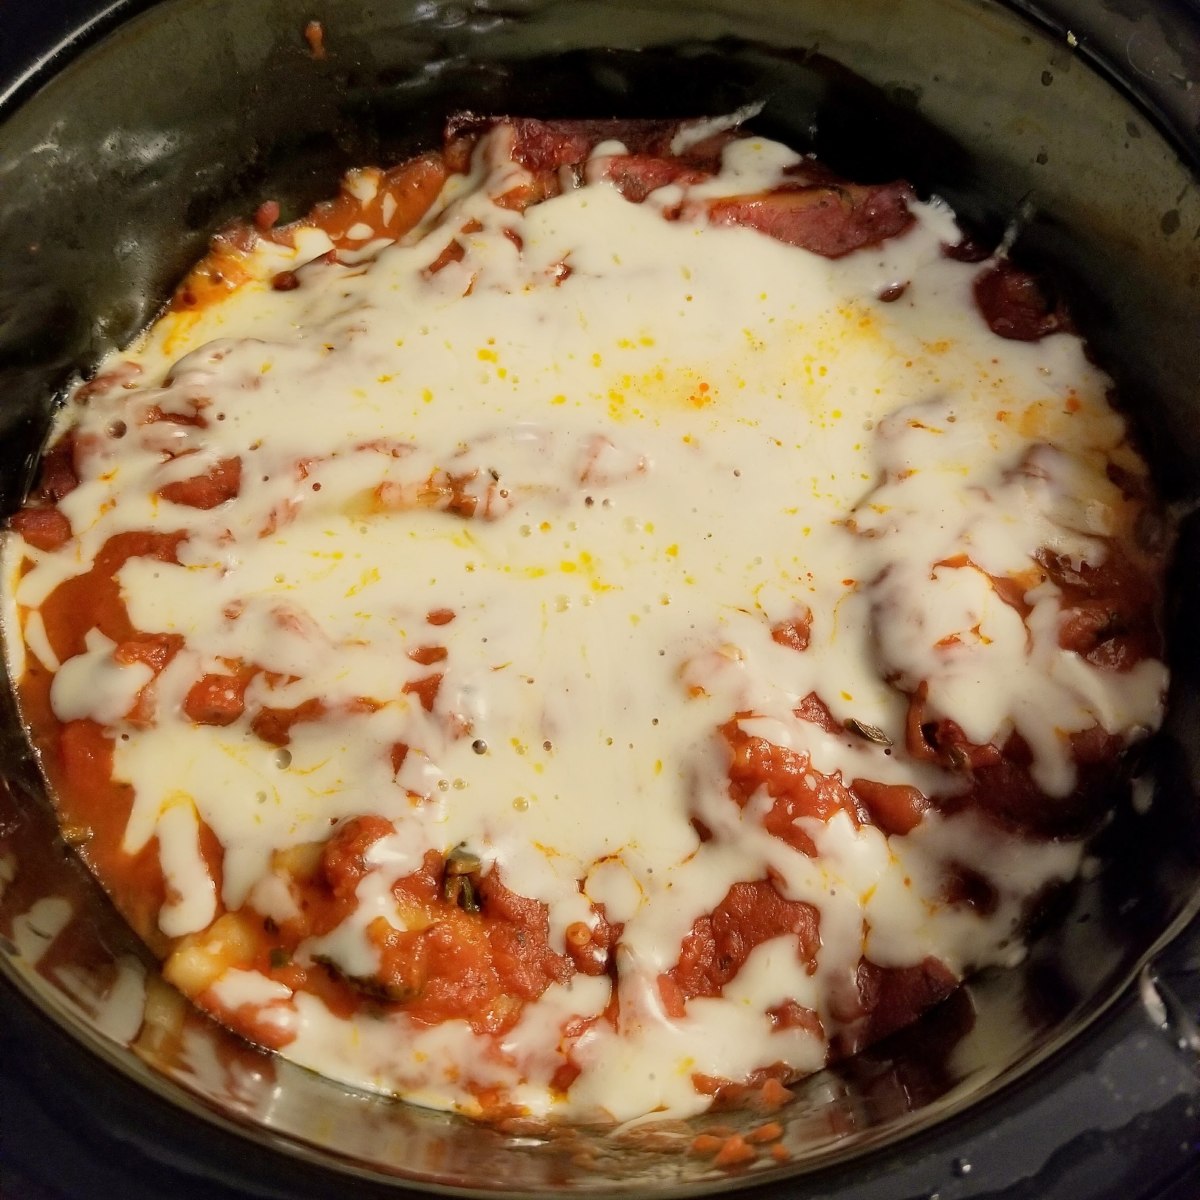 Slow Cooker Manicotti With Three Cheeses and Kale